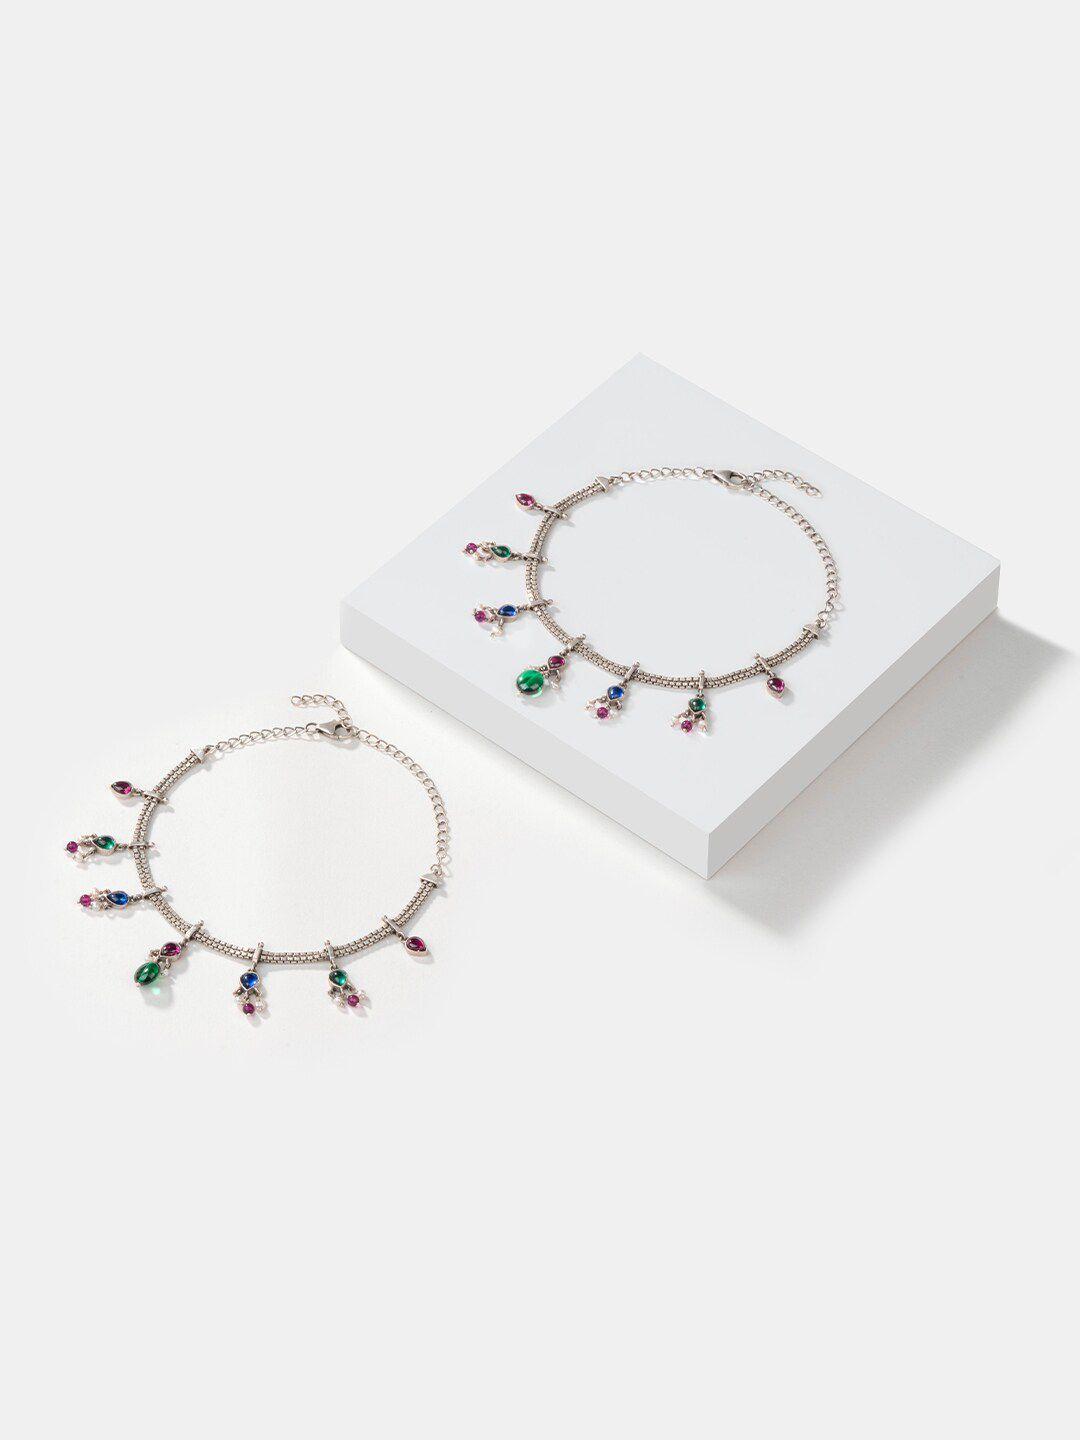 shaya set of 2 92.5 sterling silver stone-studded & beaded anklets